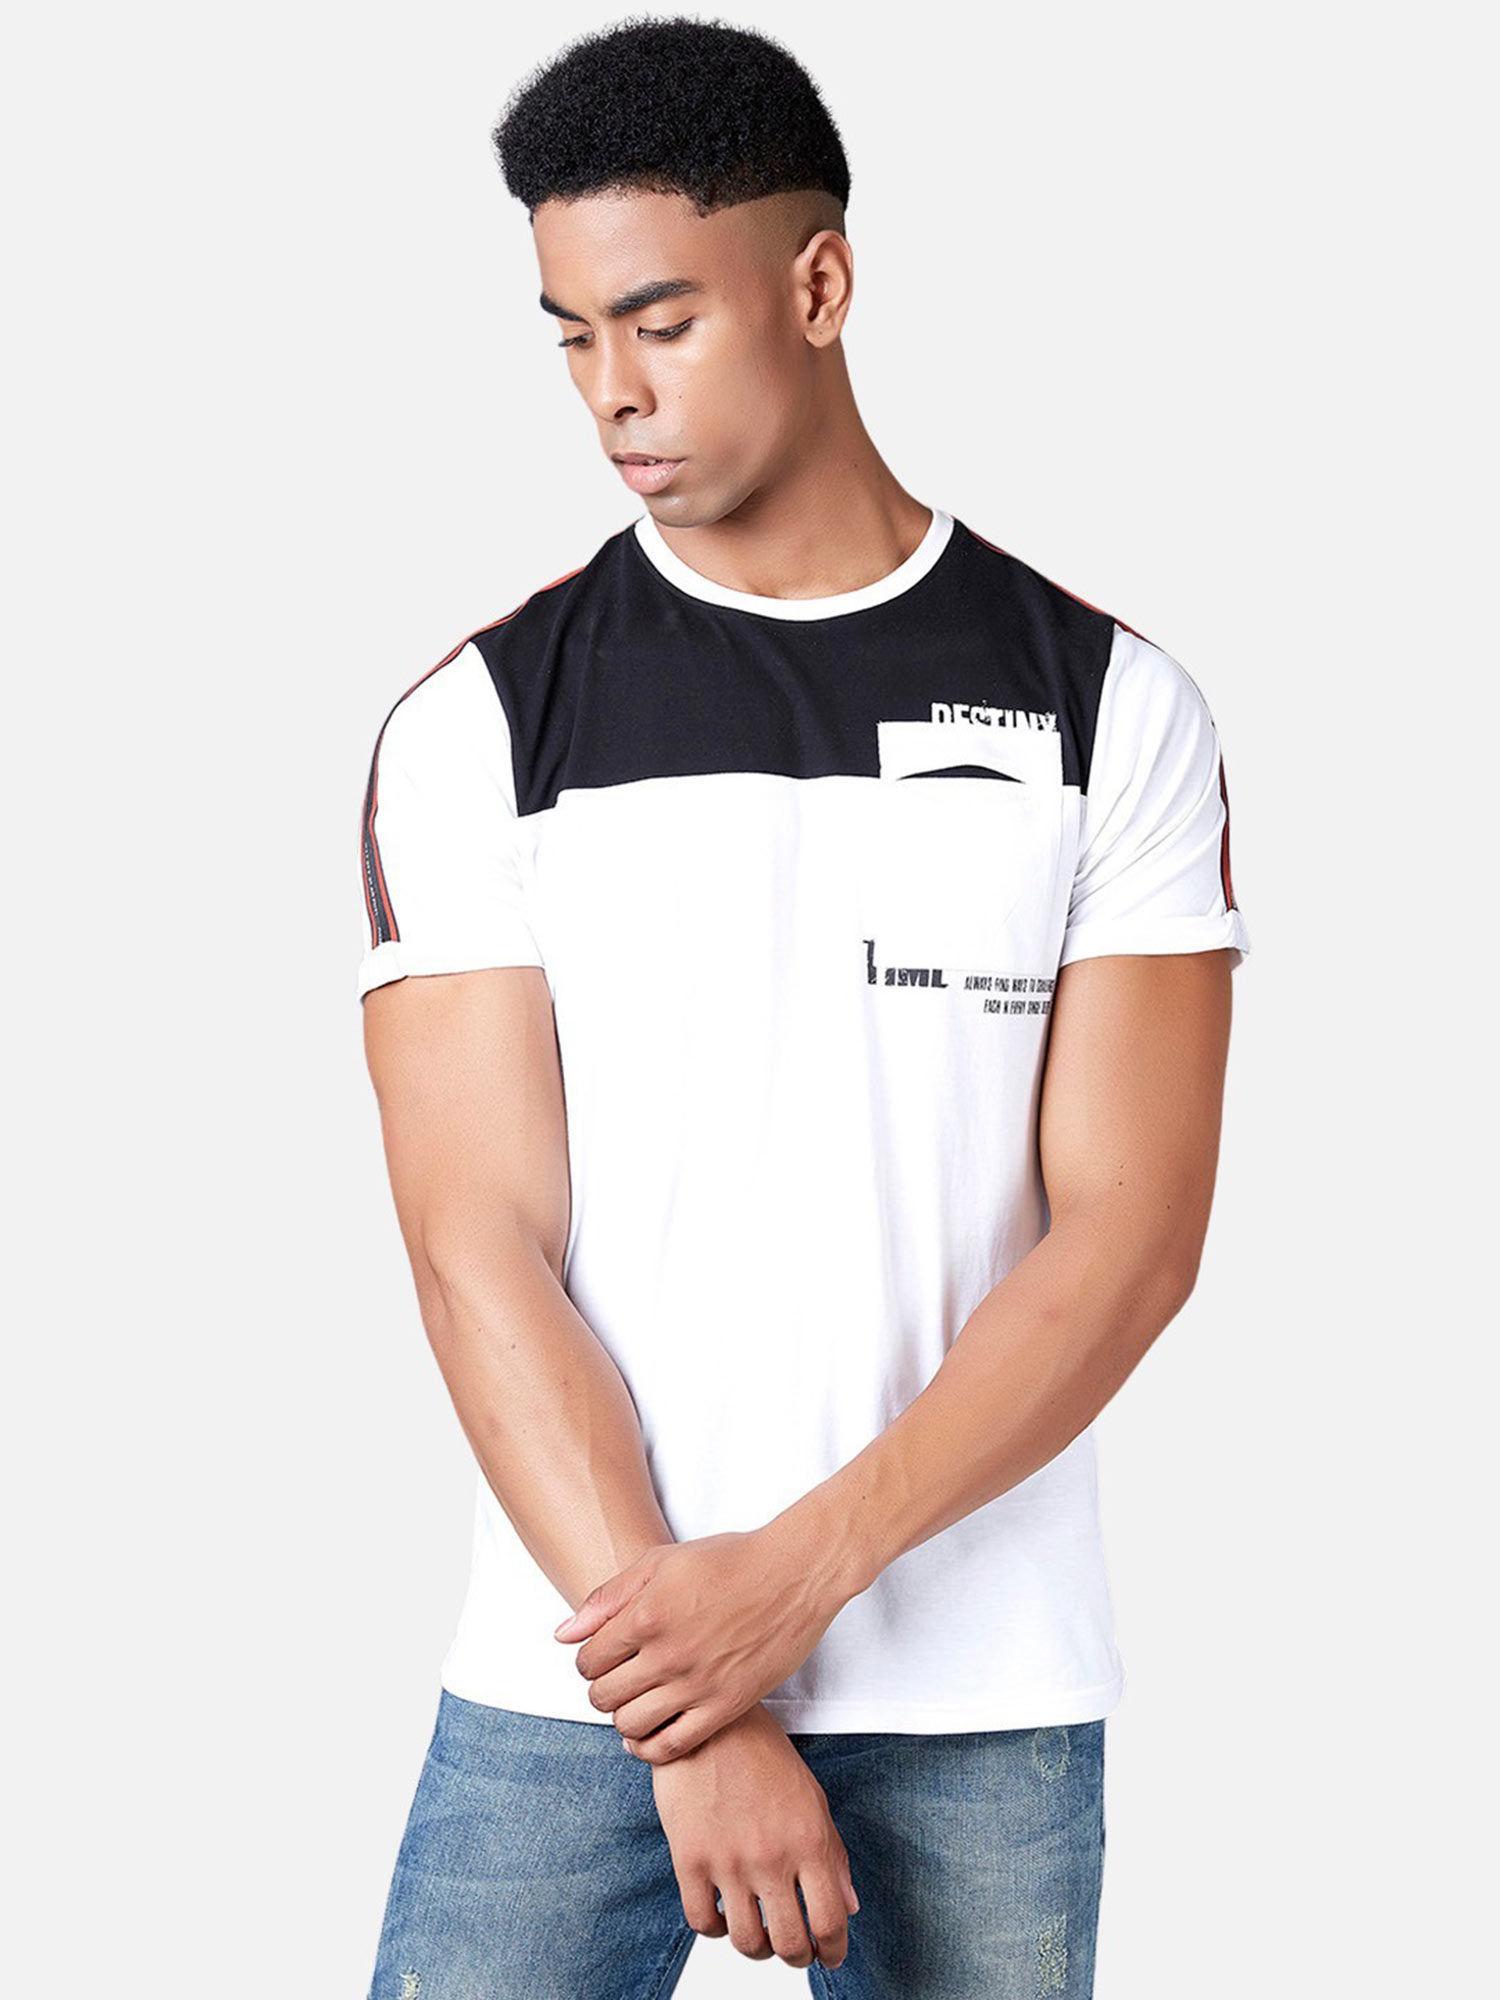 patch pocket panel style t-shirt